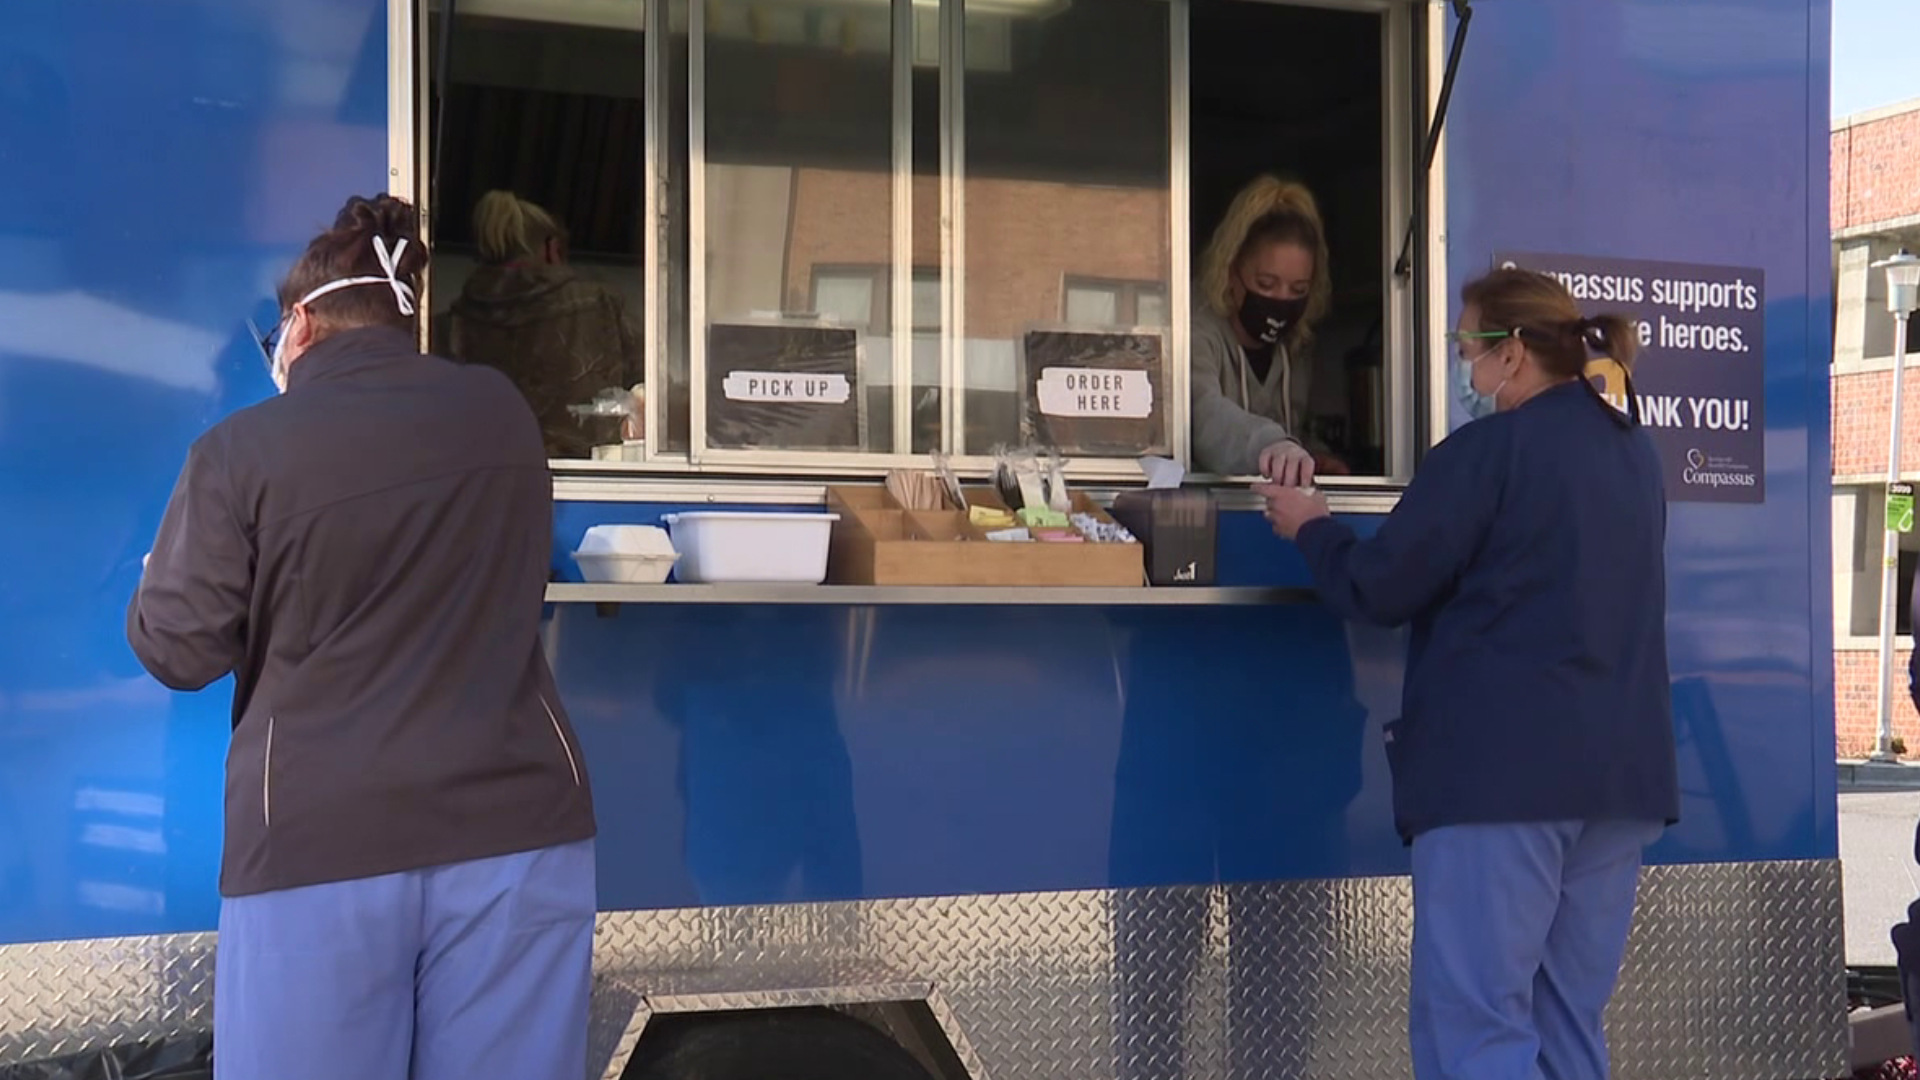 Workers from Lehigh-Valley Hospital Schuylkill were treated to free food and coffee on Tuesday.